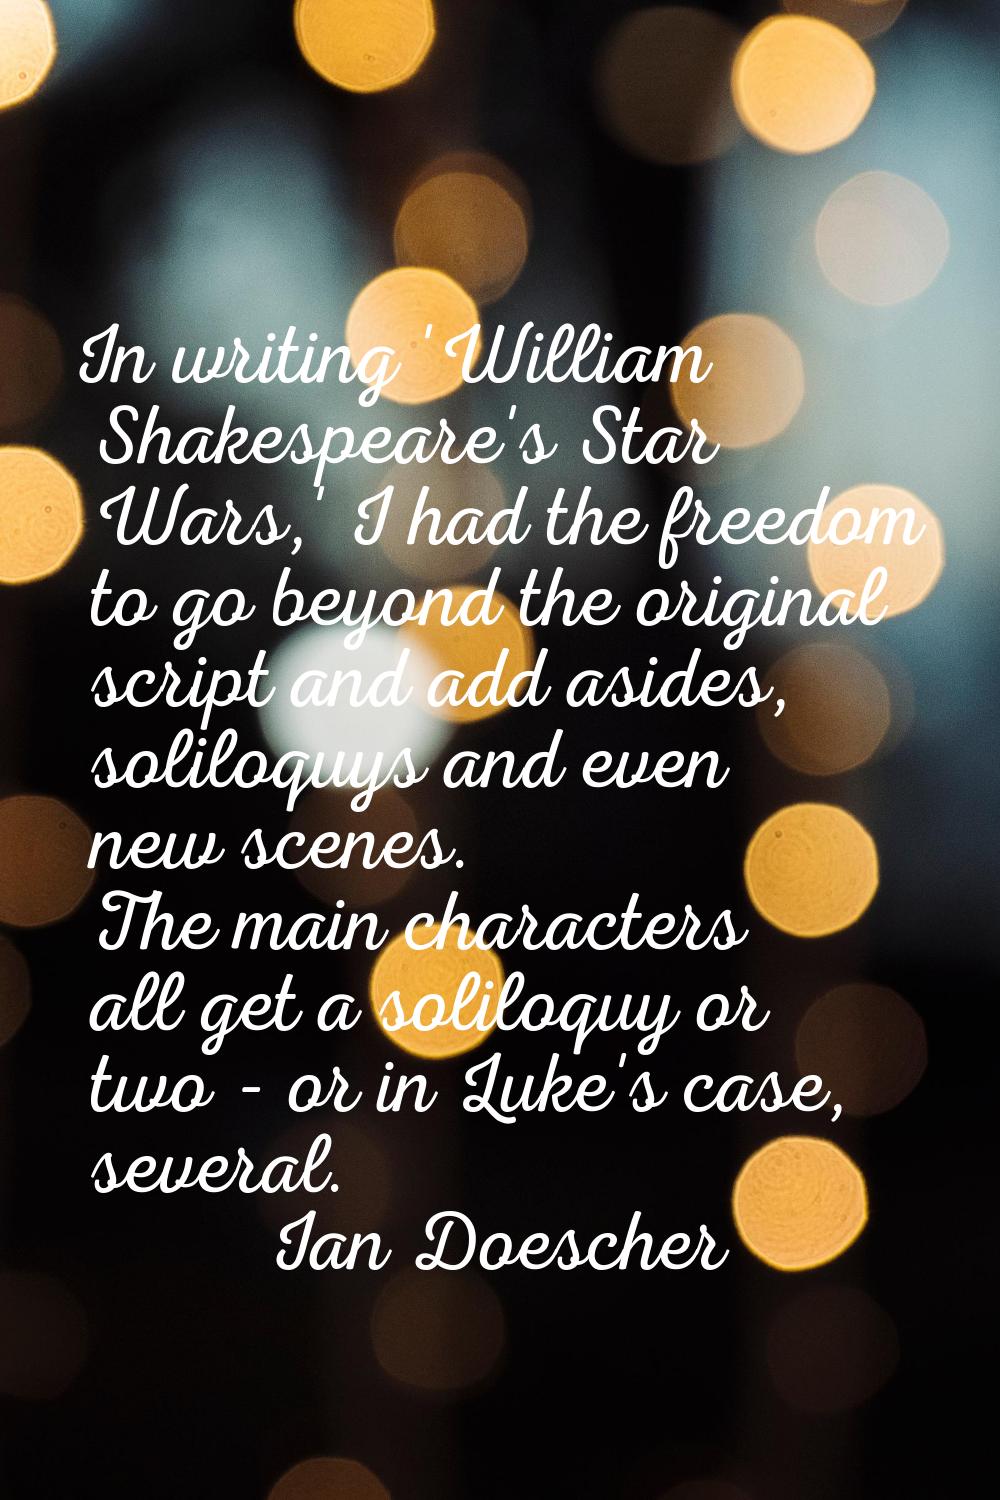 In writing 'William Shakespeare's Star Wars,' I had the freedom to go beyond the original script an